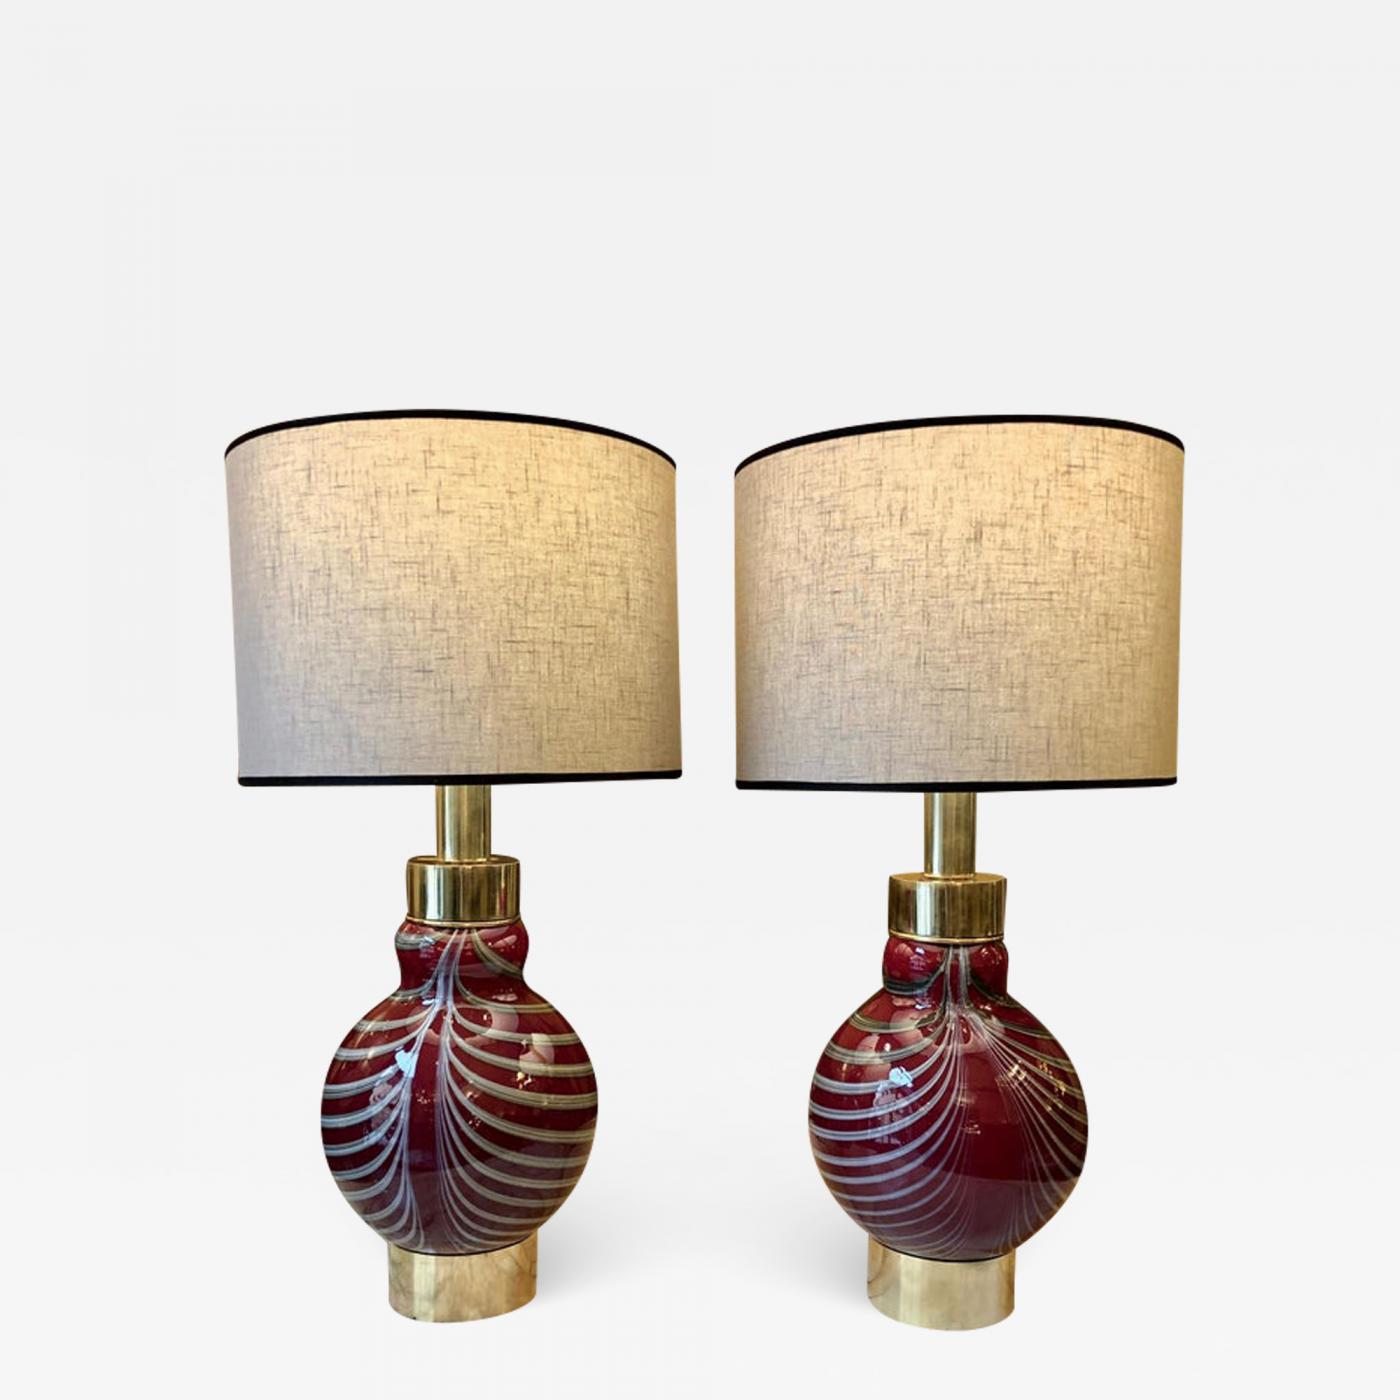 Pair of red vintage table lamps